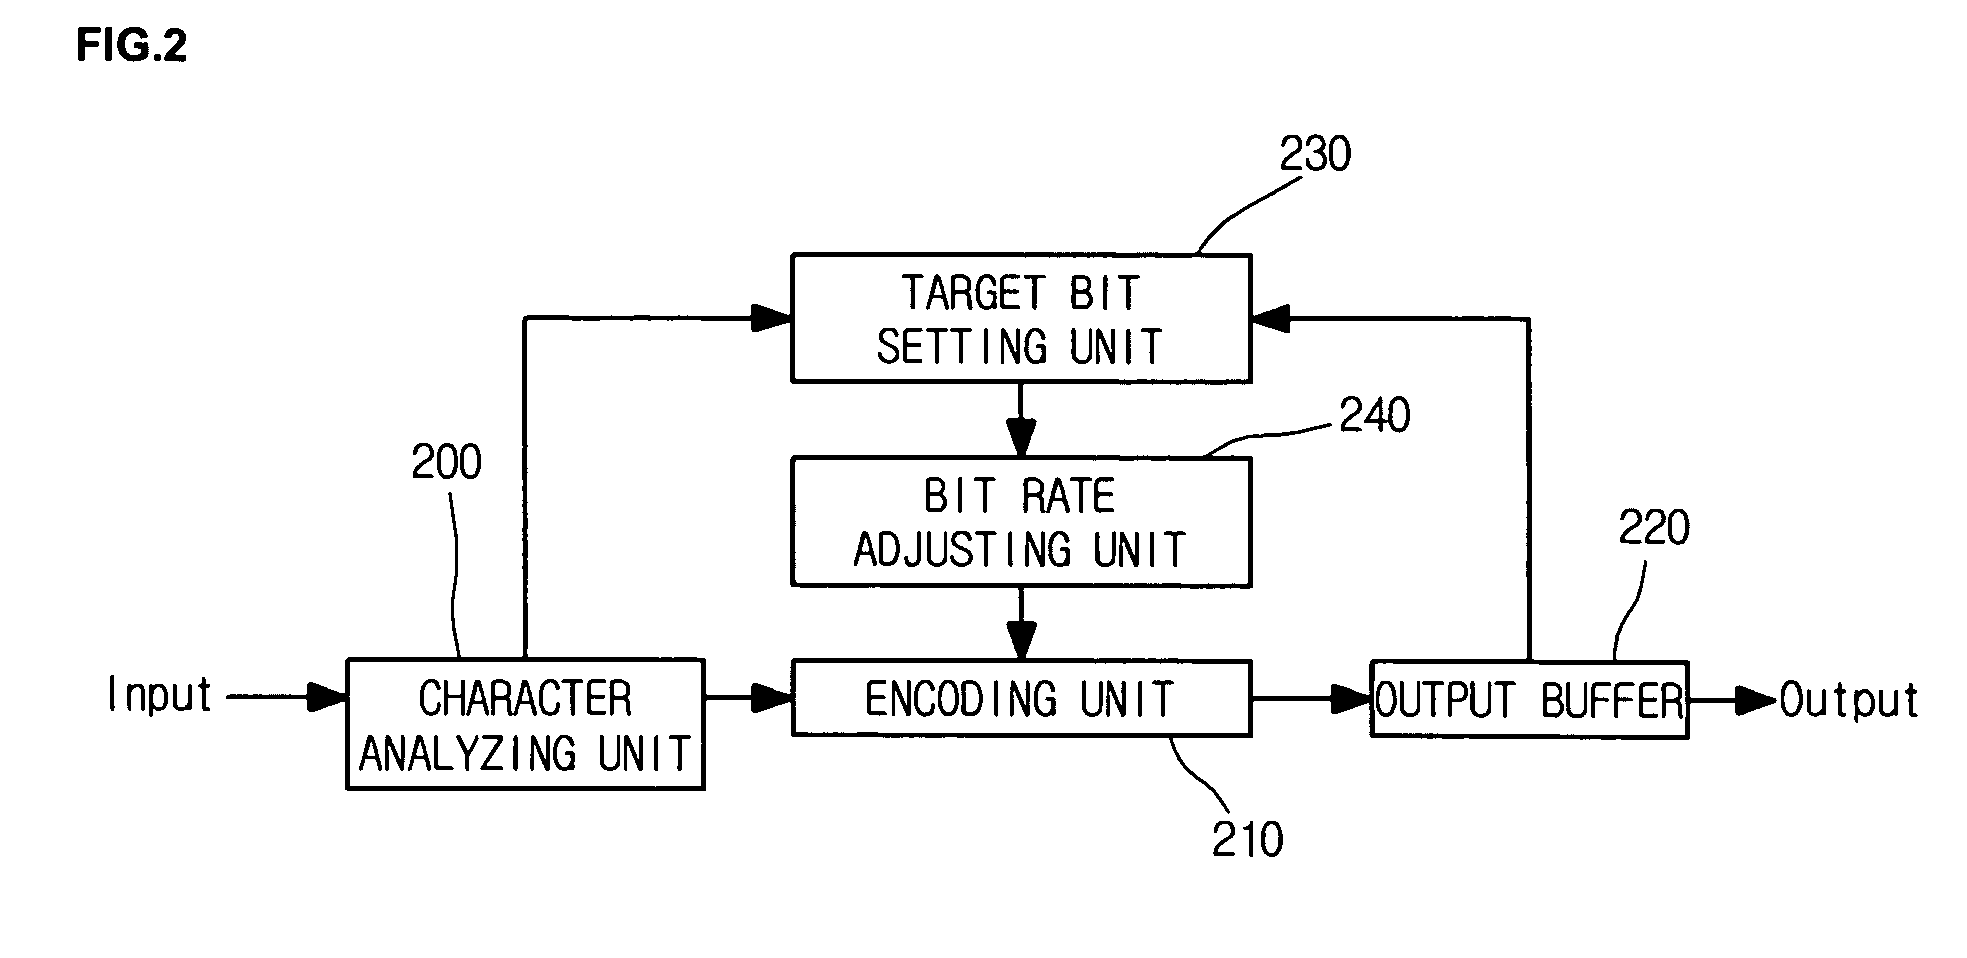 System and method for controlling bit rate of an image